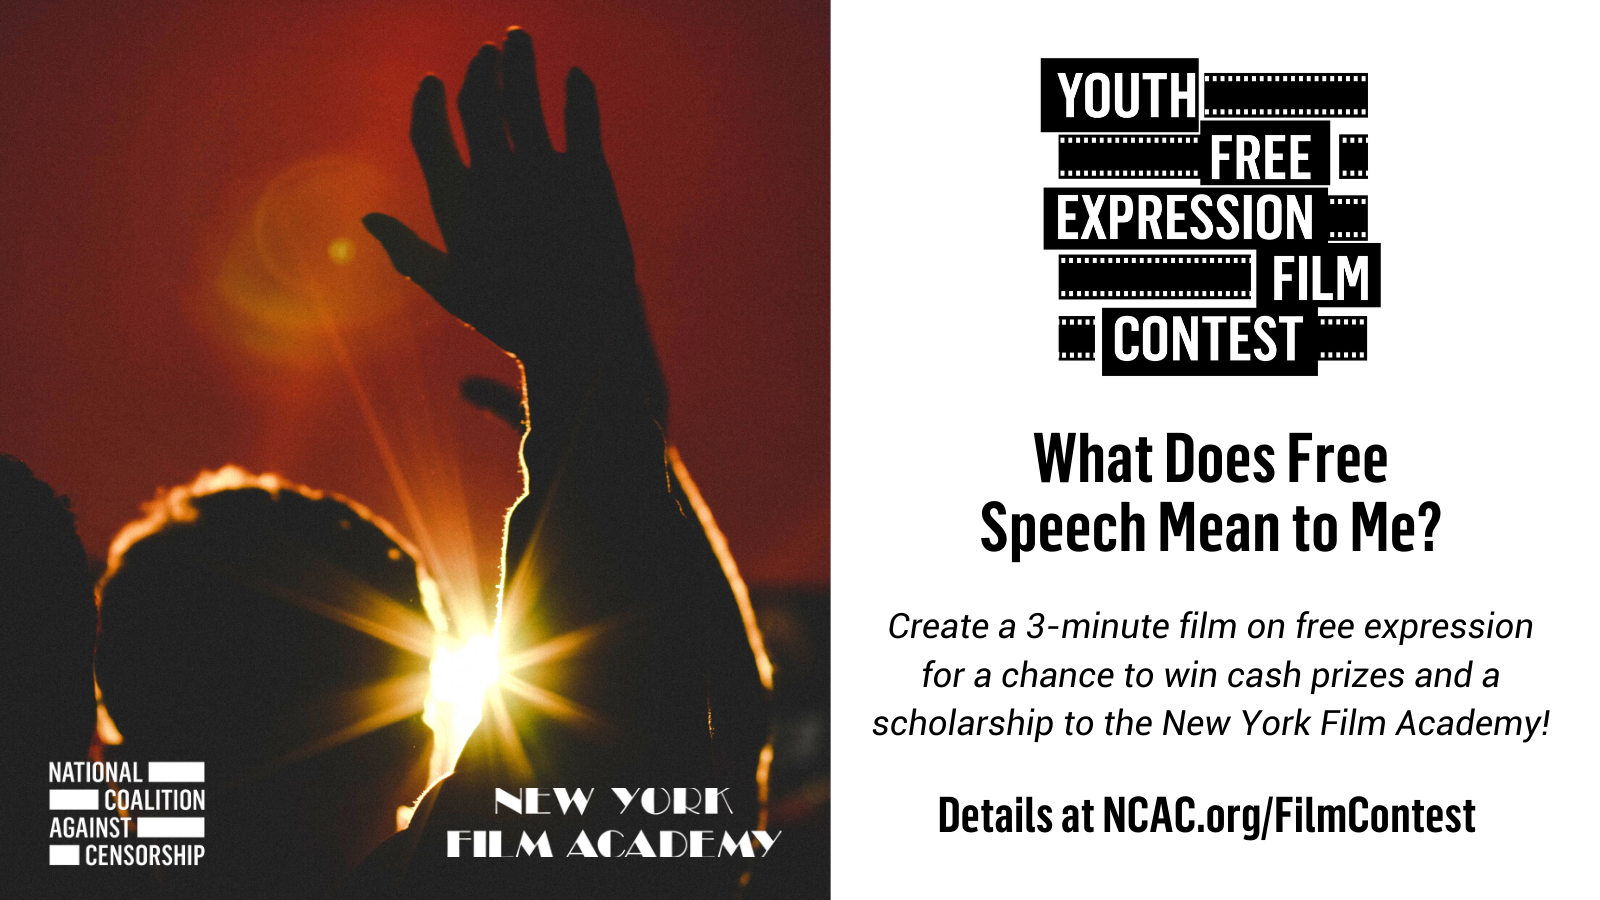 Youth Free Expression Film Contest